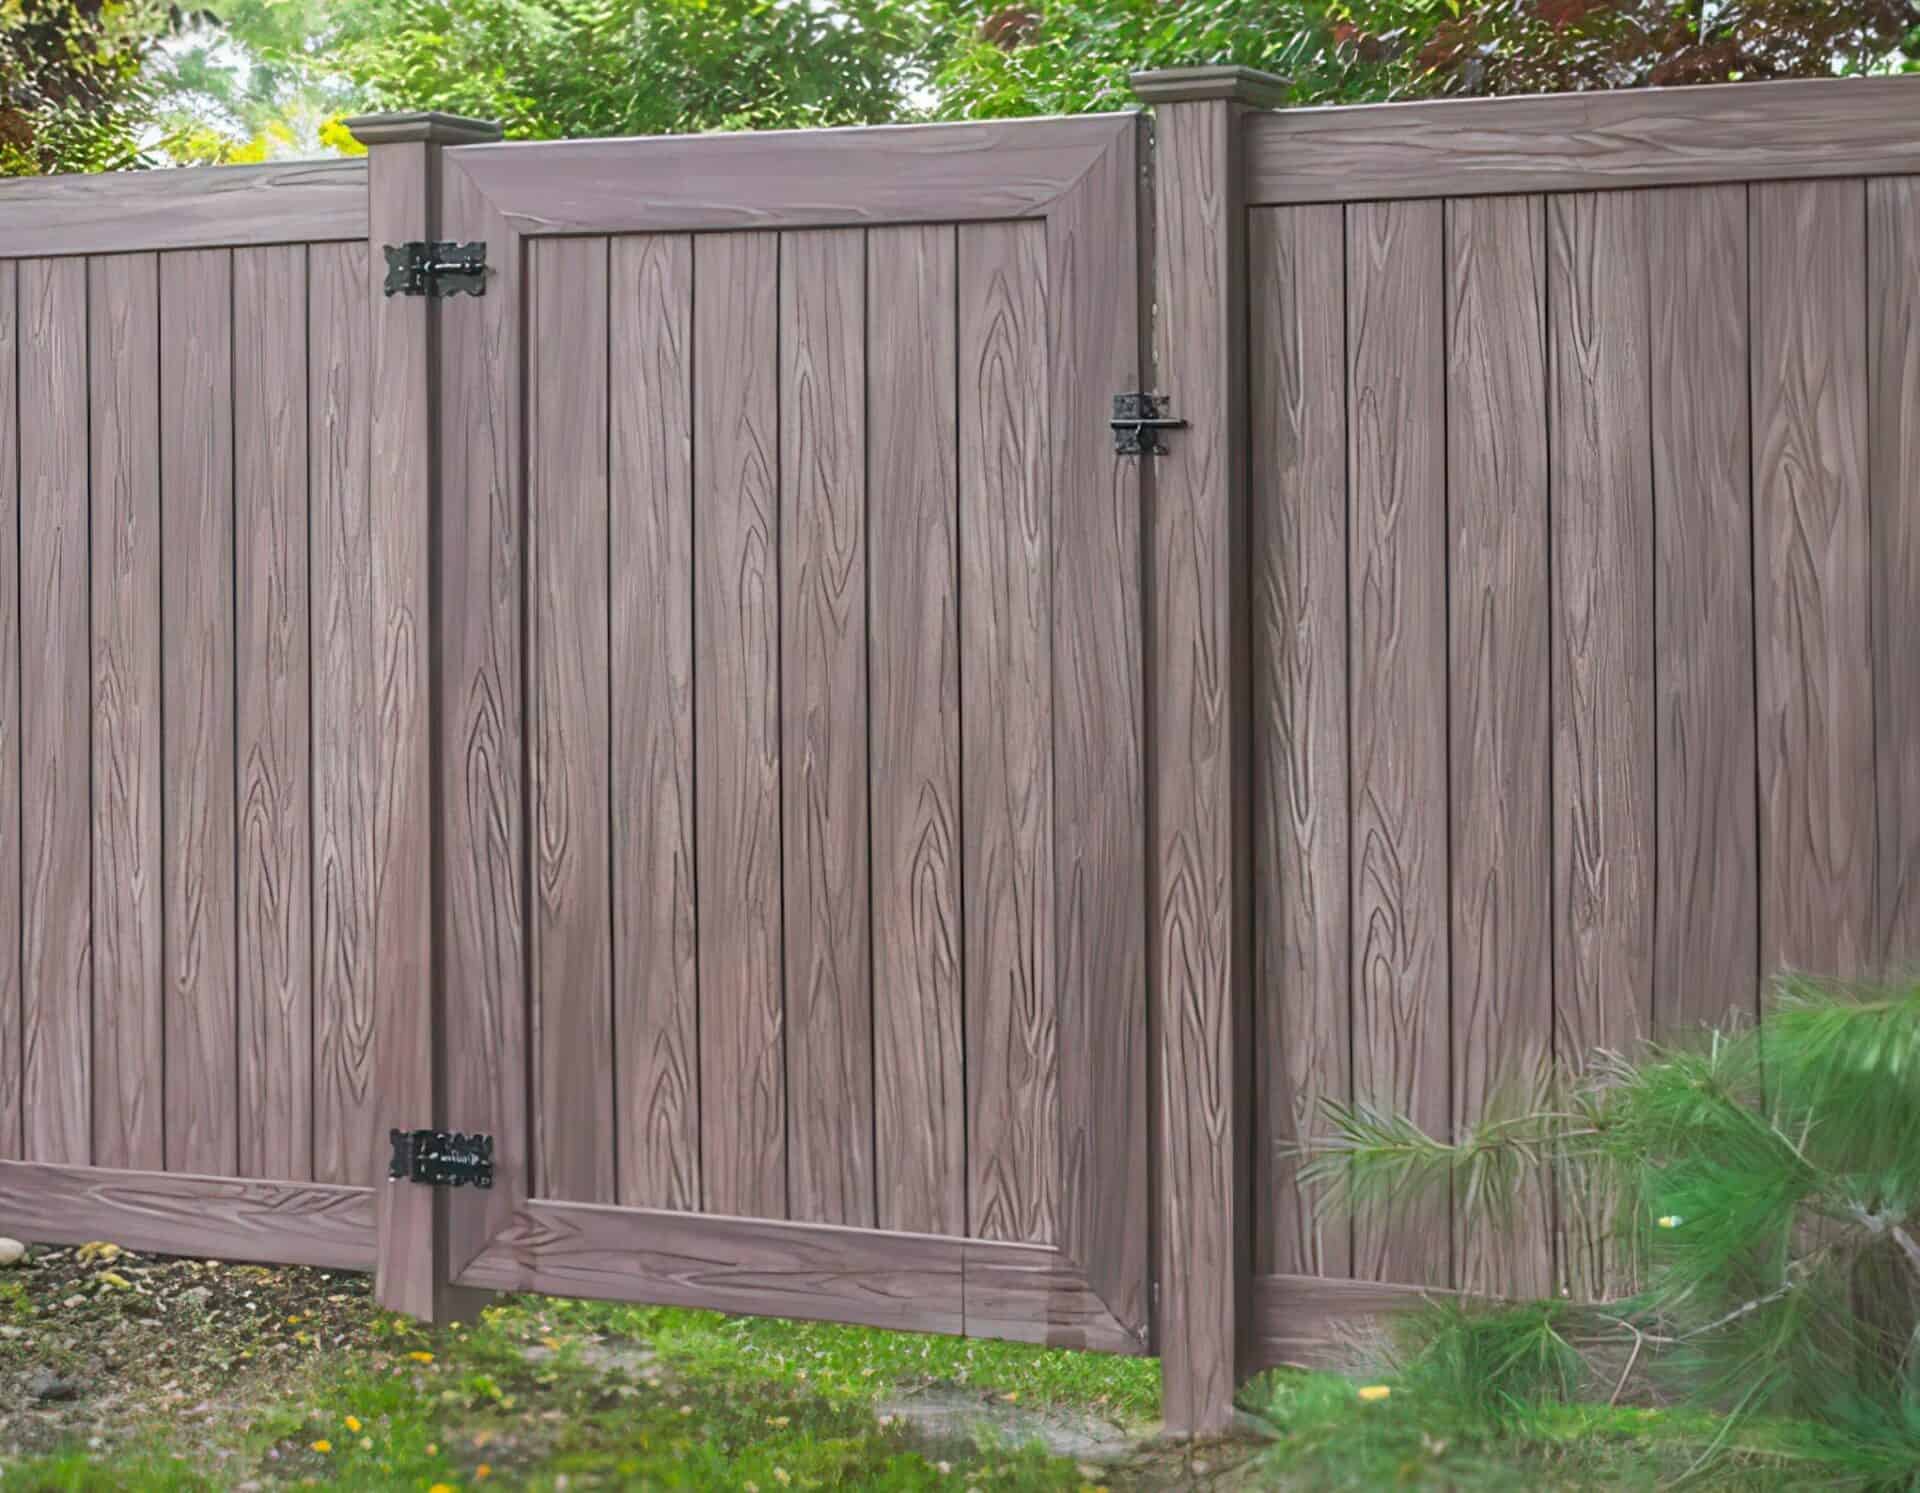 Vinyl doors and fence with trees in the background, creating a natural and durable outdoor aesthetic